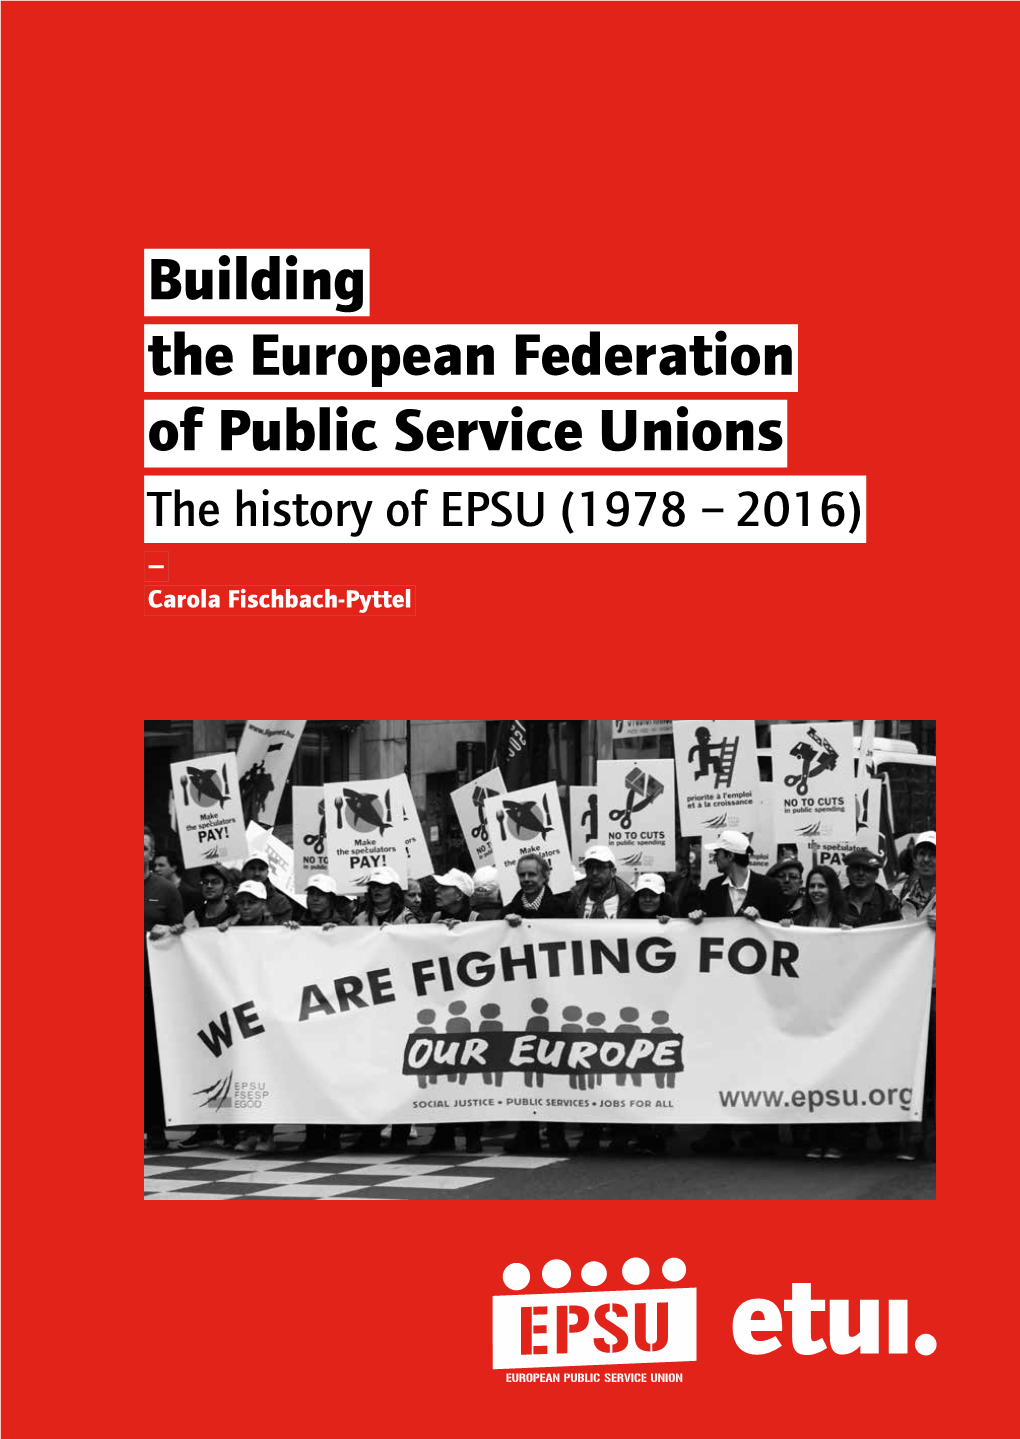 Building the European Federation of Public Service Unions the History – 2016) of EPSU (1978 Carola Fischbach-Pyttel